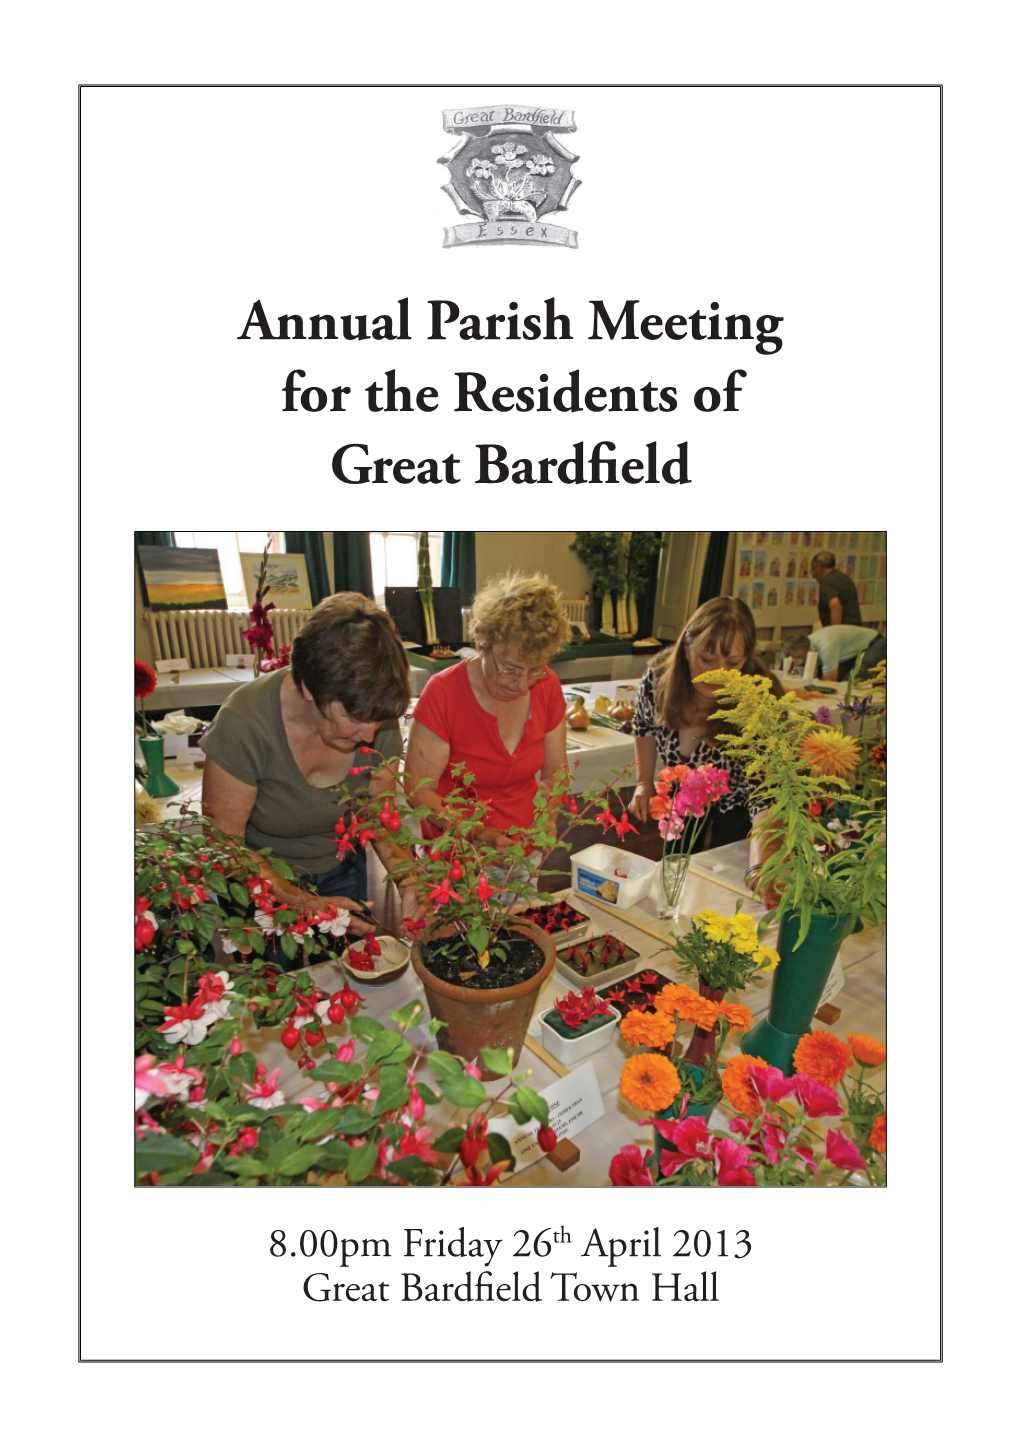 Annual Parish Meeting for the Residents of Great Bardfield